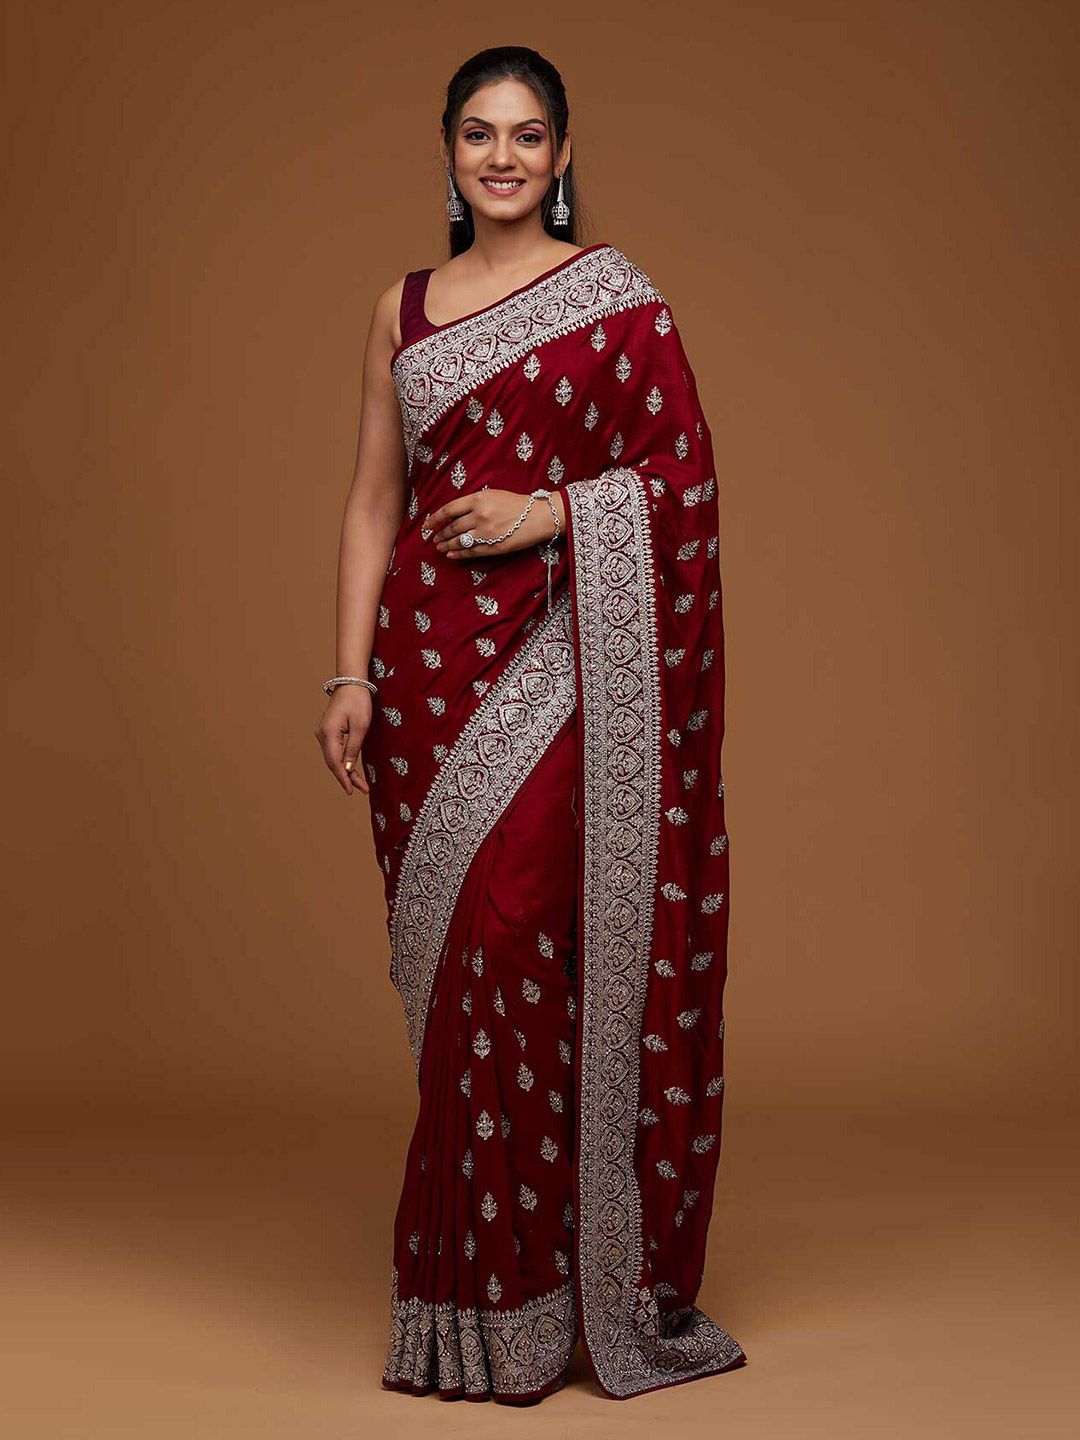 Koskii Maroon & Gold-Toned Floral Embroidered Art Silk Saree Price in India